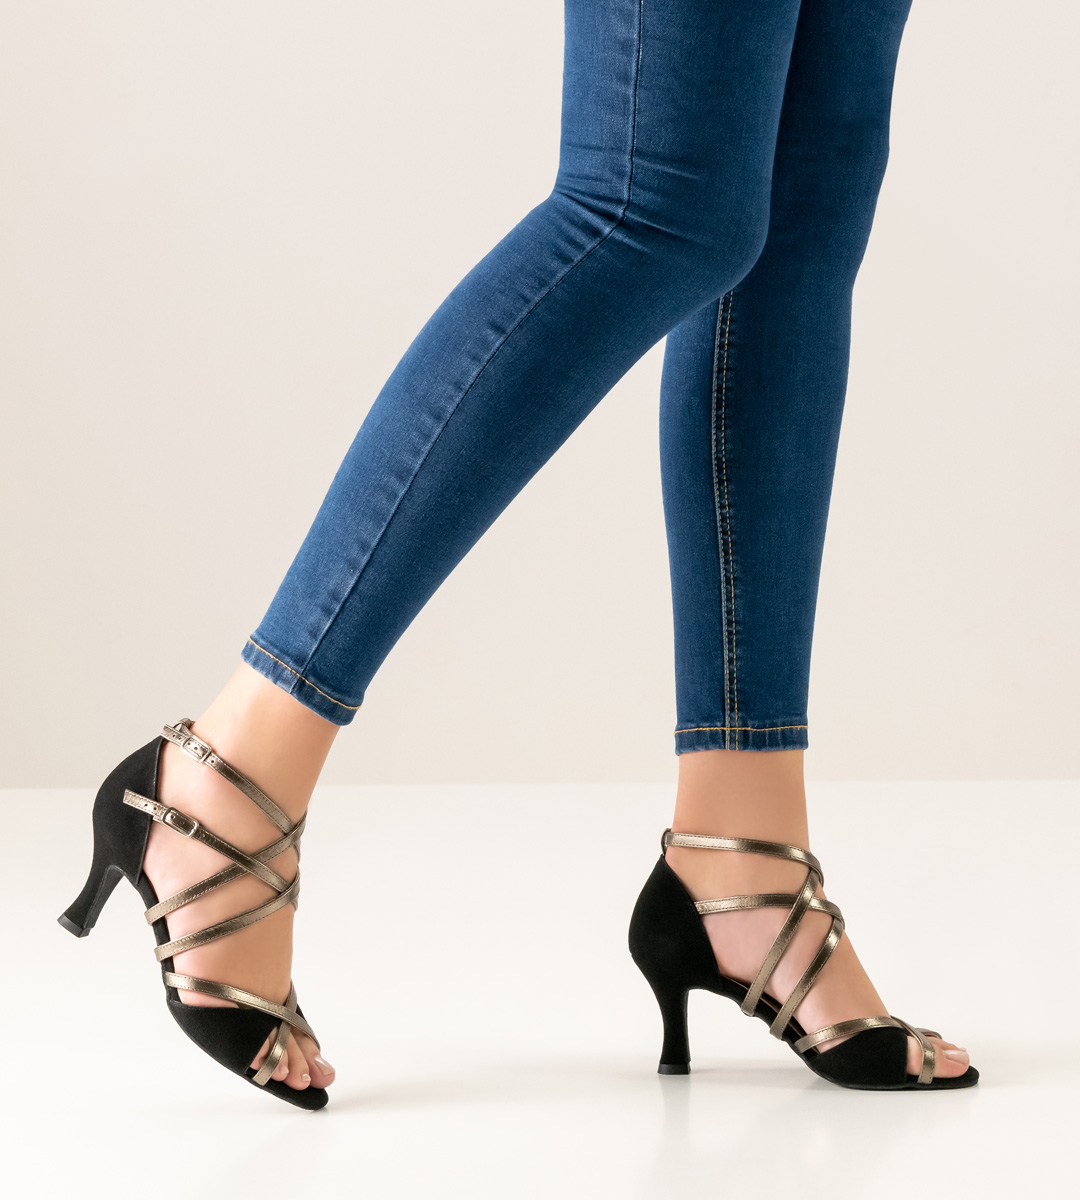 6,5 cm high Werner Kern ladies dance shoe in combination with jeans in blue